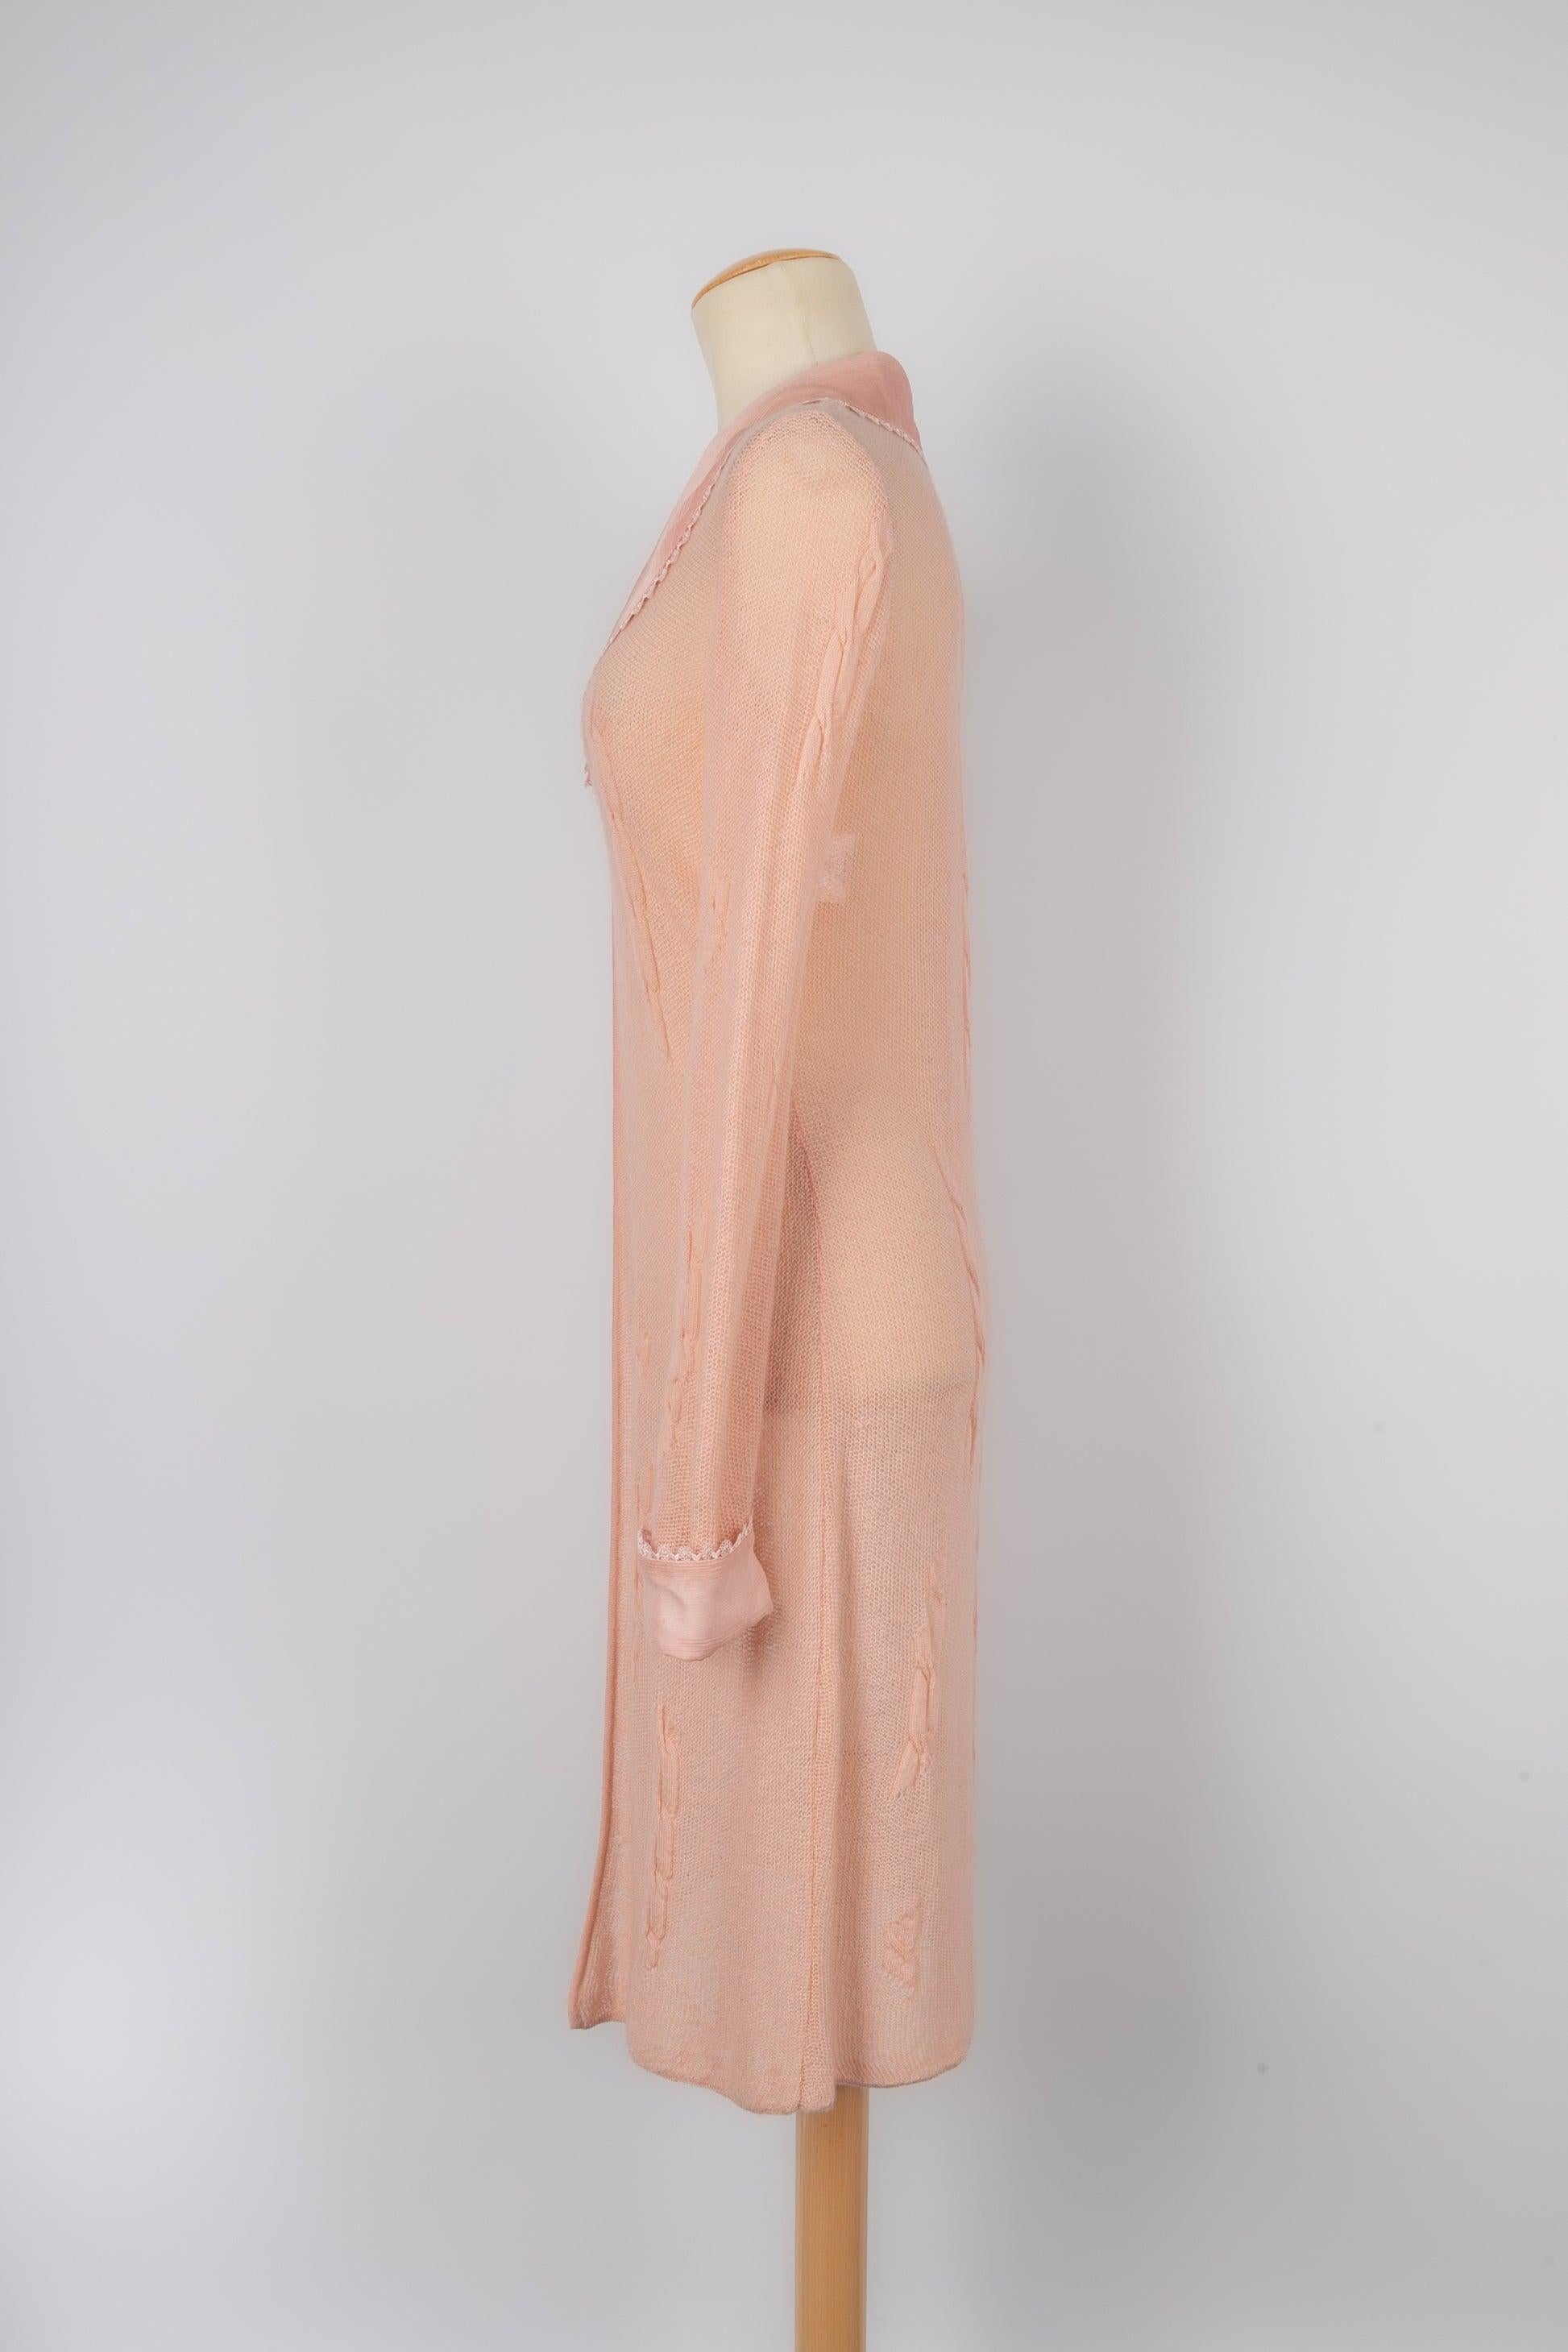 Dior - (Made in Italy) Pink silk and cashmere long cardigan. Size and composition label missing, it fits a 36FR.

Additional information:
Condition: Very good condition
Dimensions: Shoulder width: 36 cm - Sleeve length: 63 cm - Length: 105